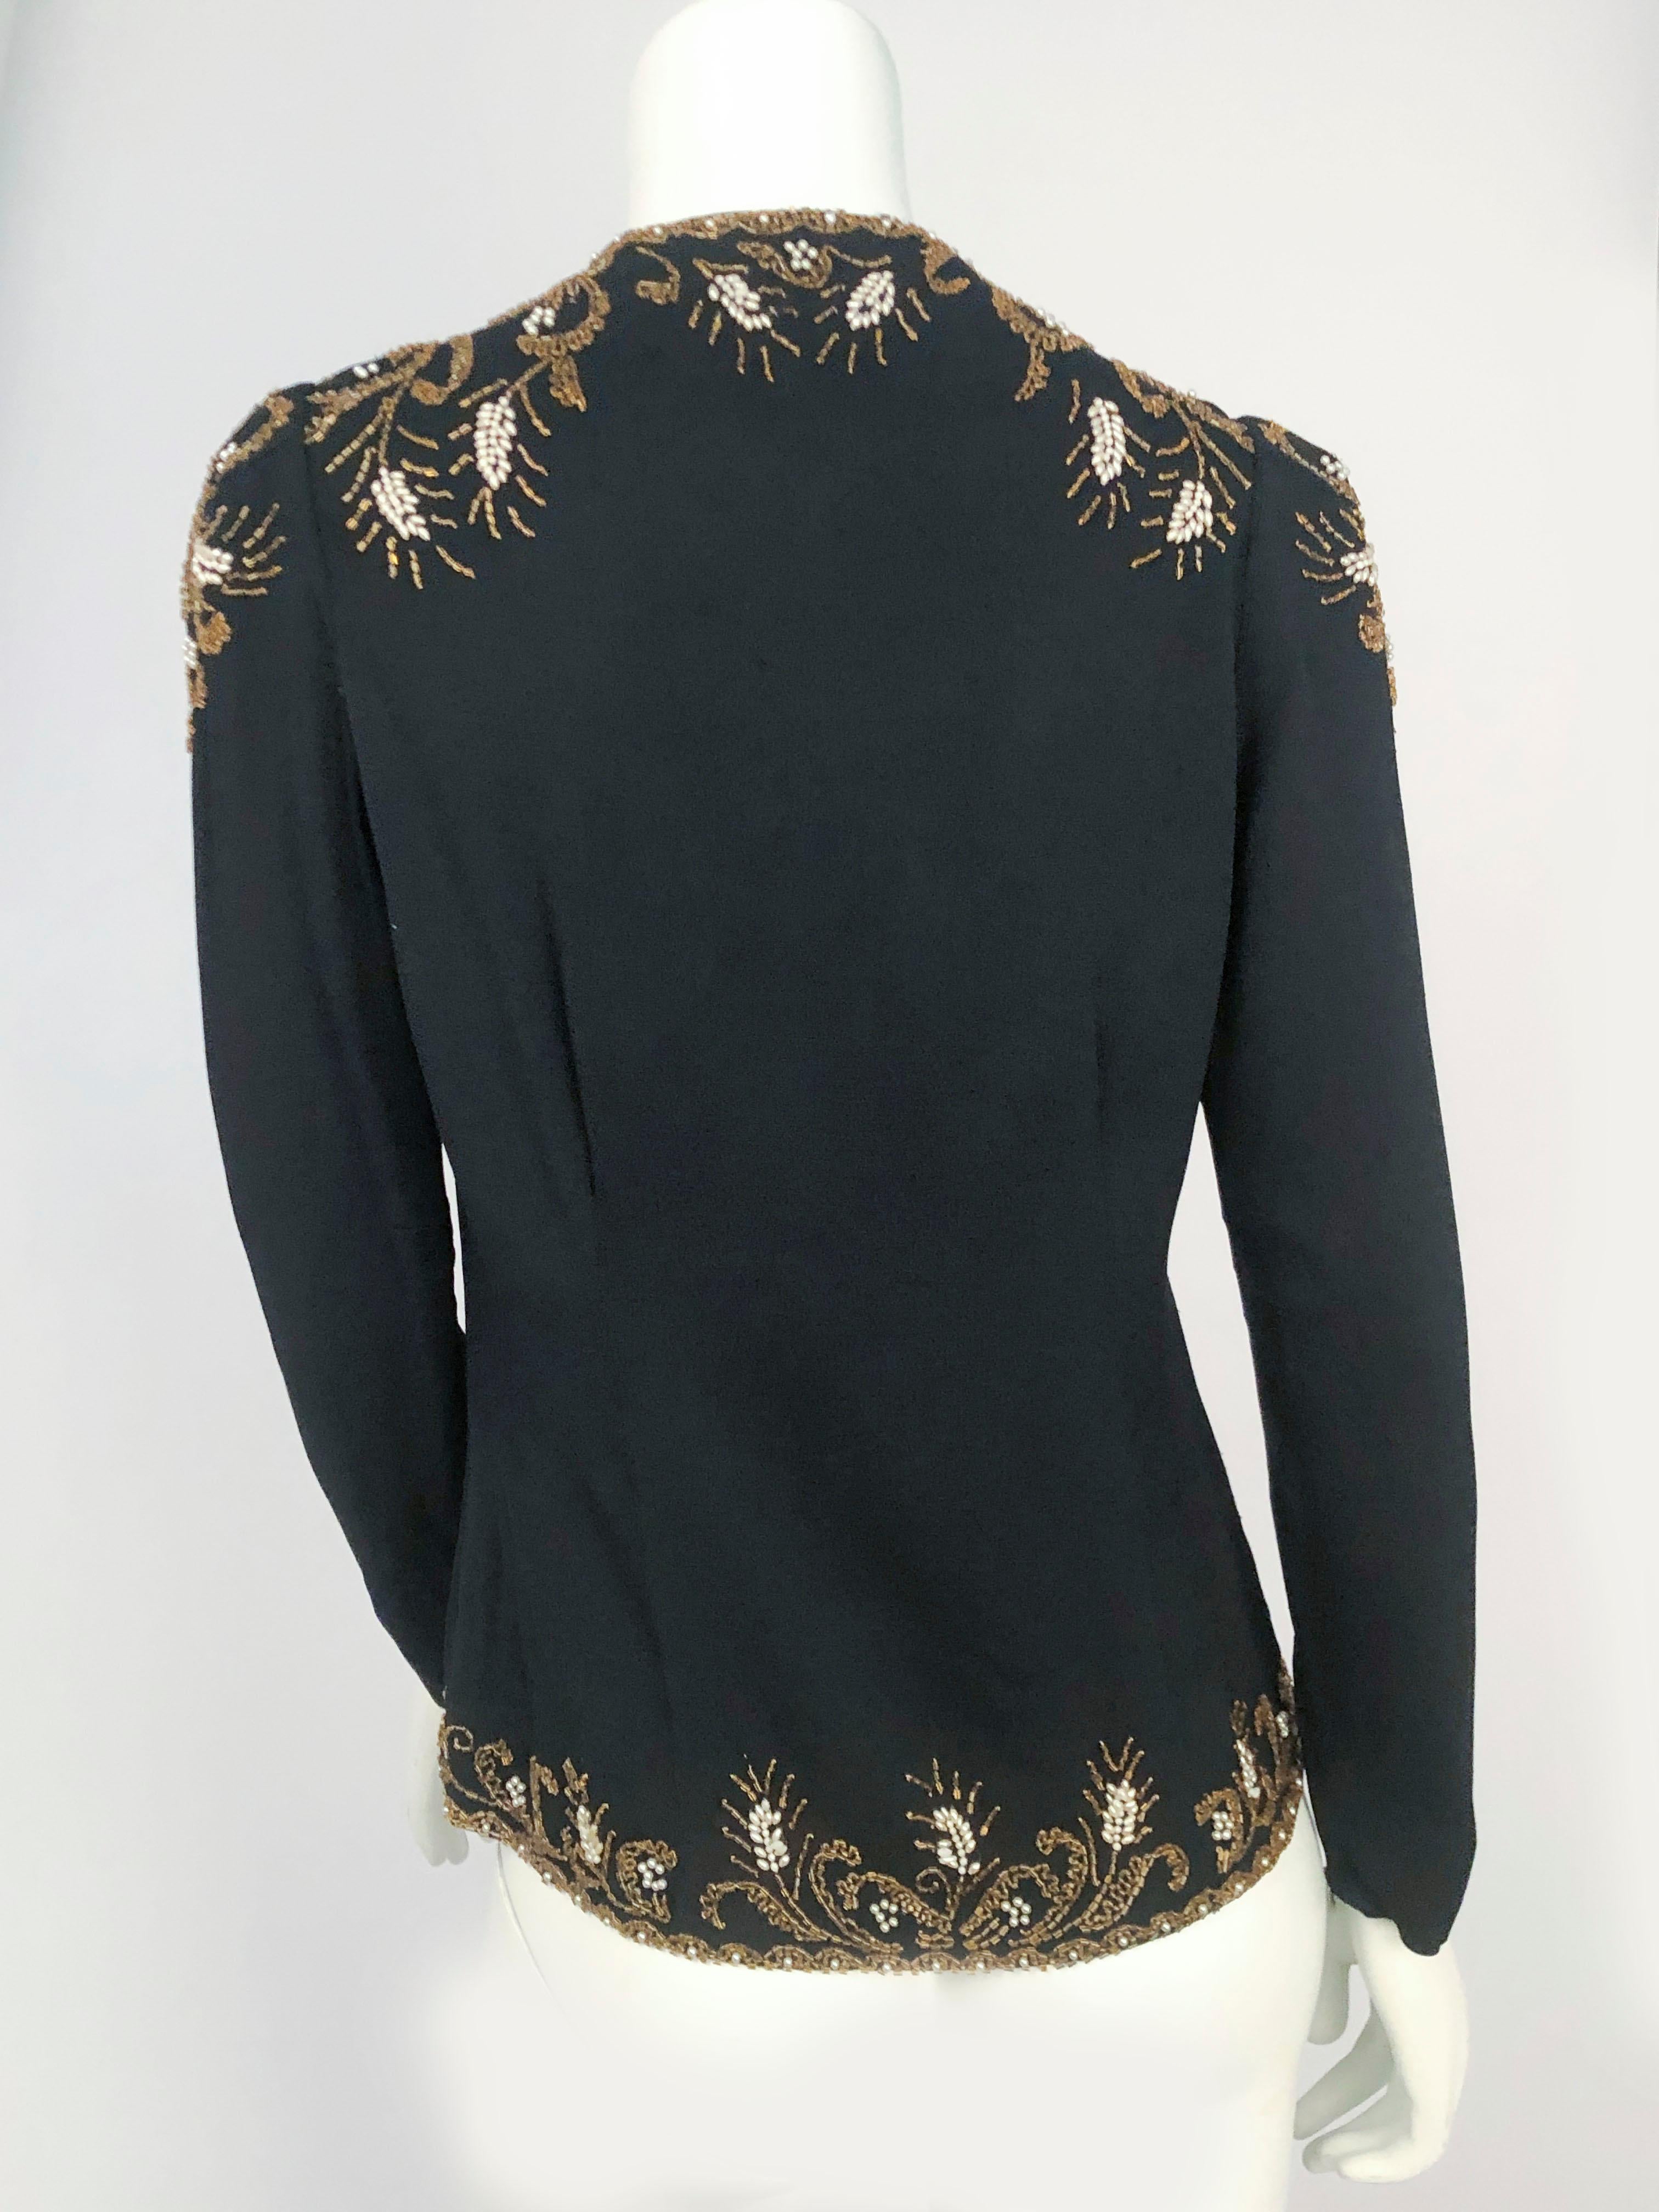 1930s/1940s I. Magnin Black Crepe Evening Jacket In Good Condition For Sale In San Francisco, CA